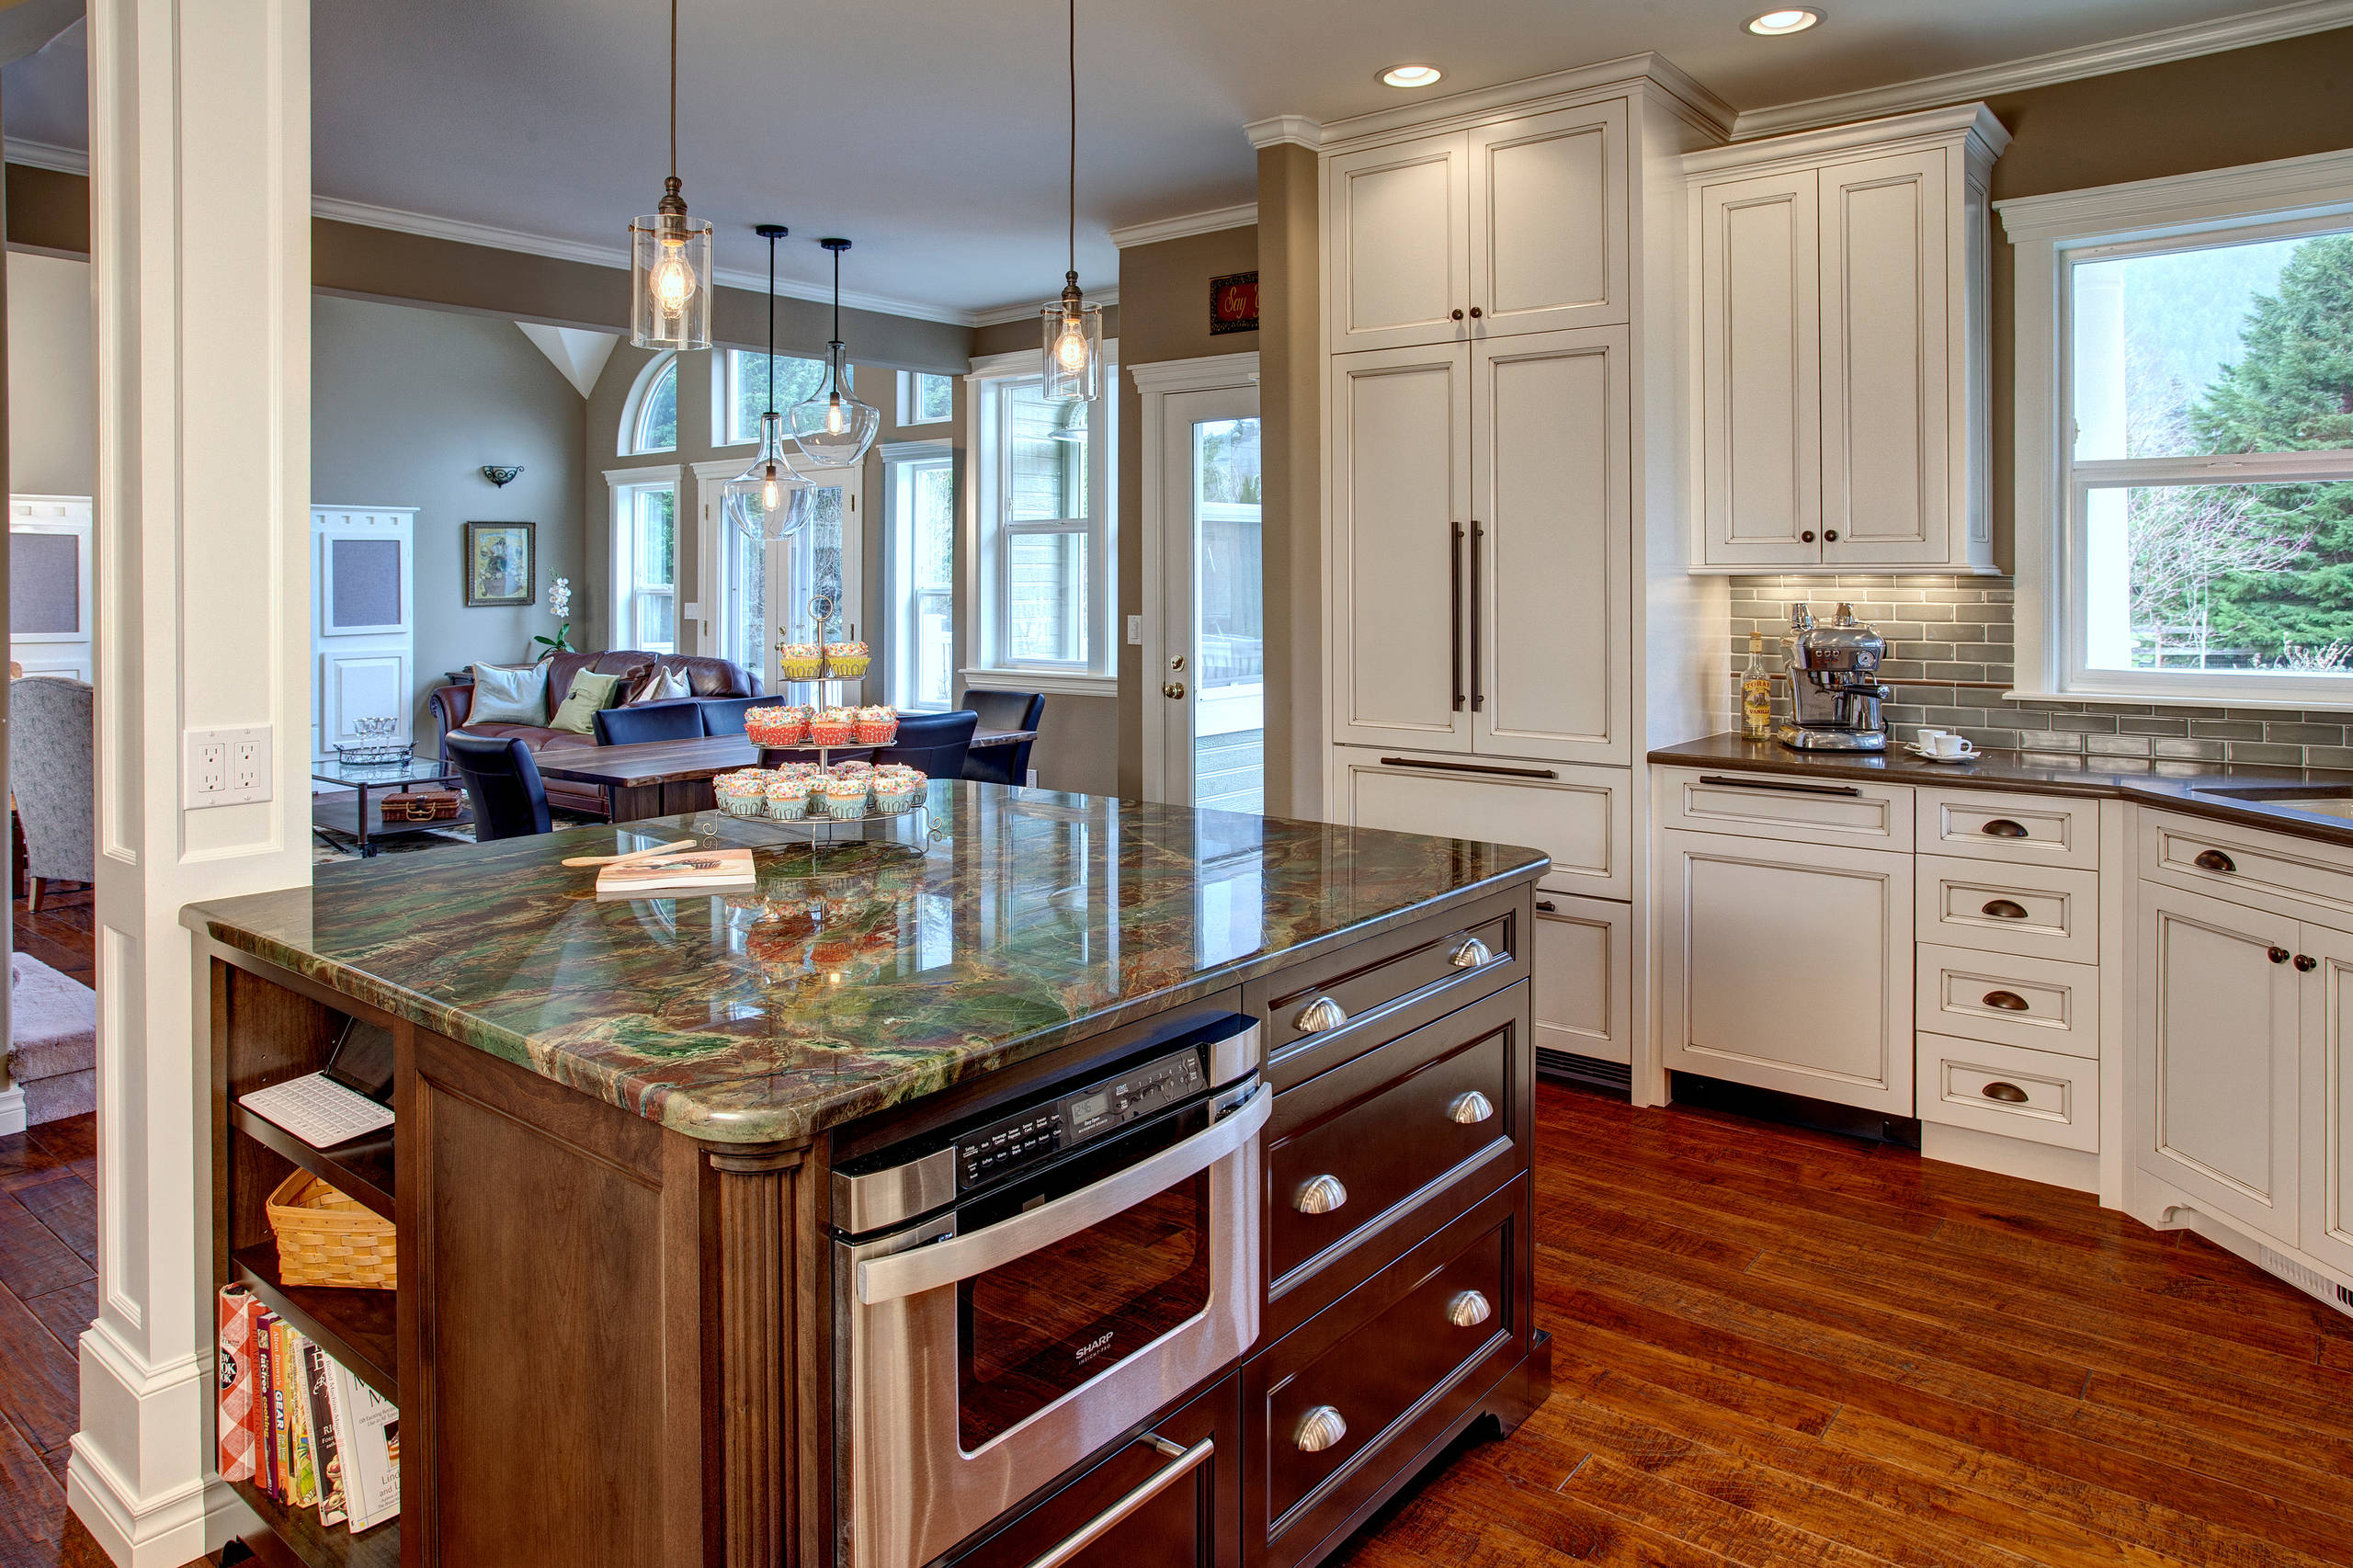 Cool white kitchen cabinets with gray glaze White Cabinets Gray Glaze Houzz